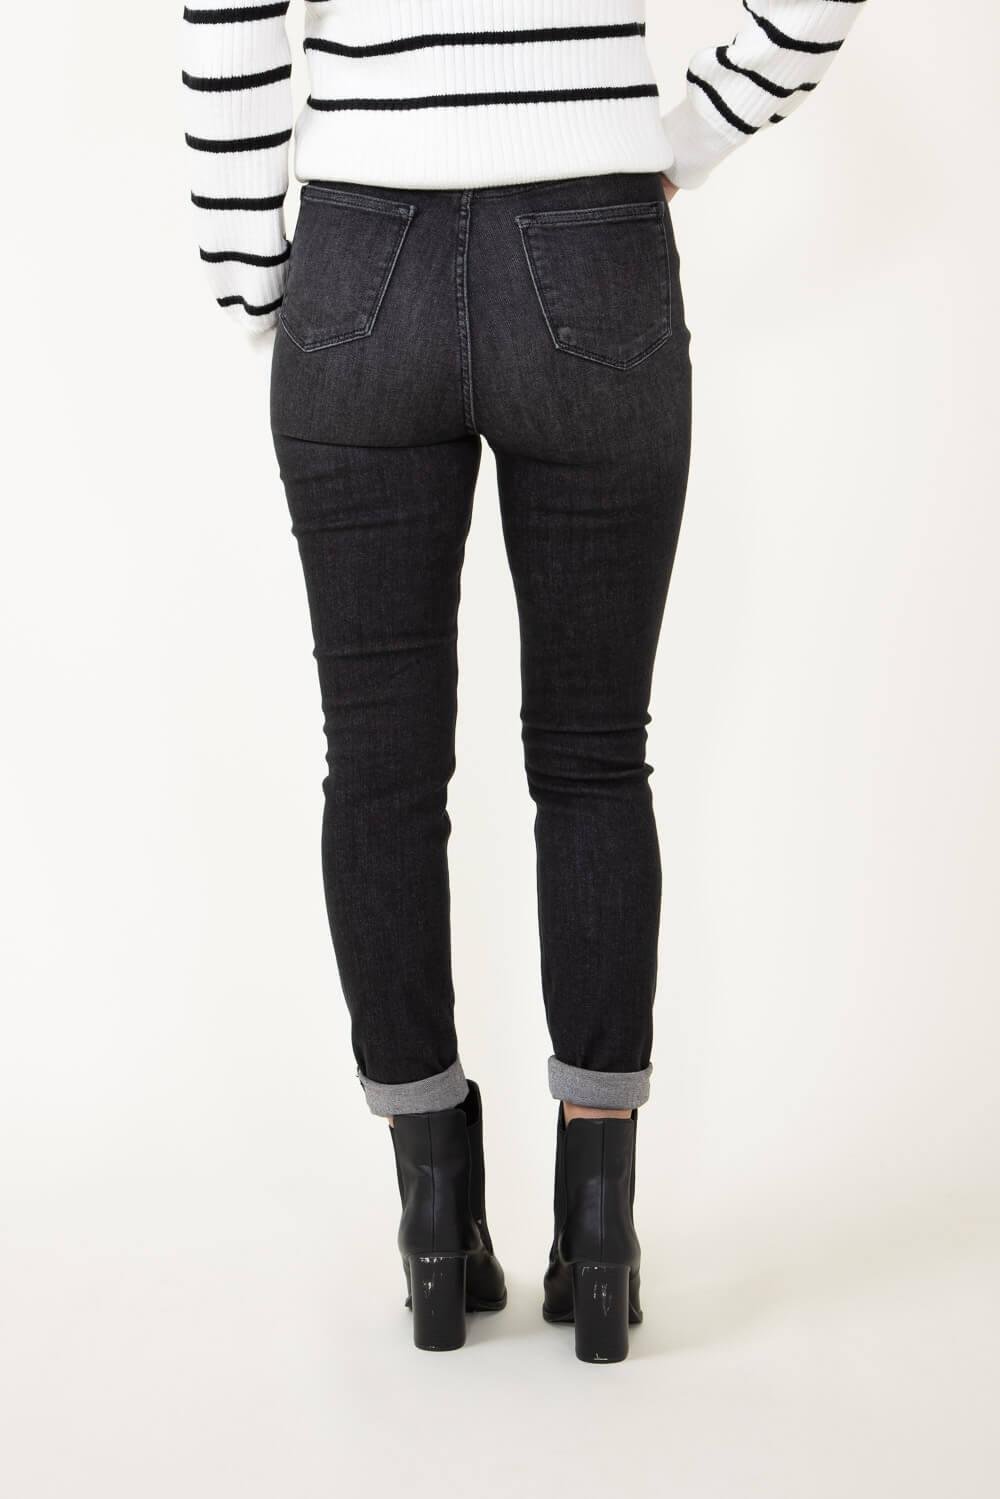 Judy Blue High Rise Tummy Control Skinny Jeans for Women in Black